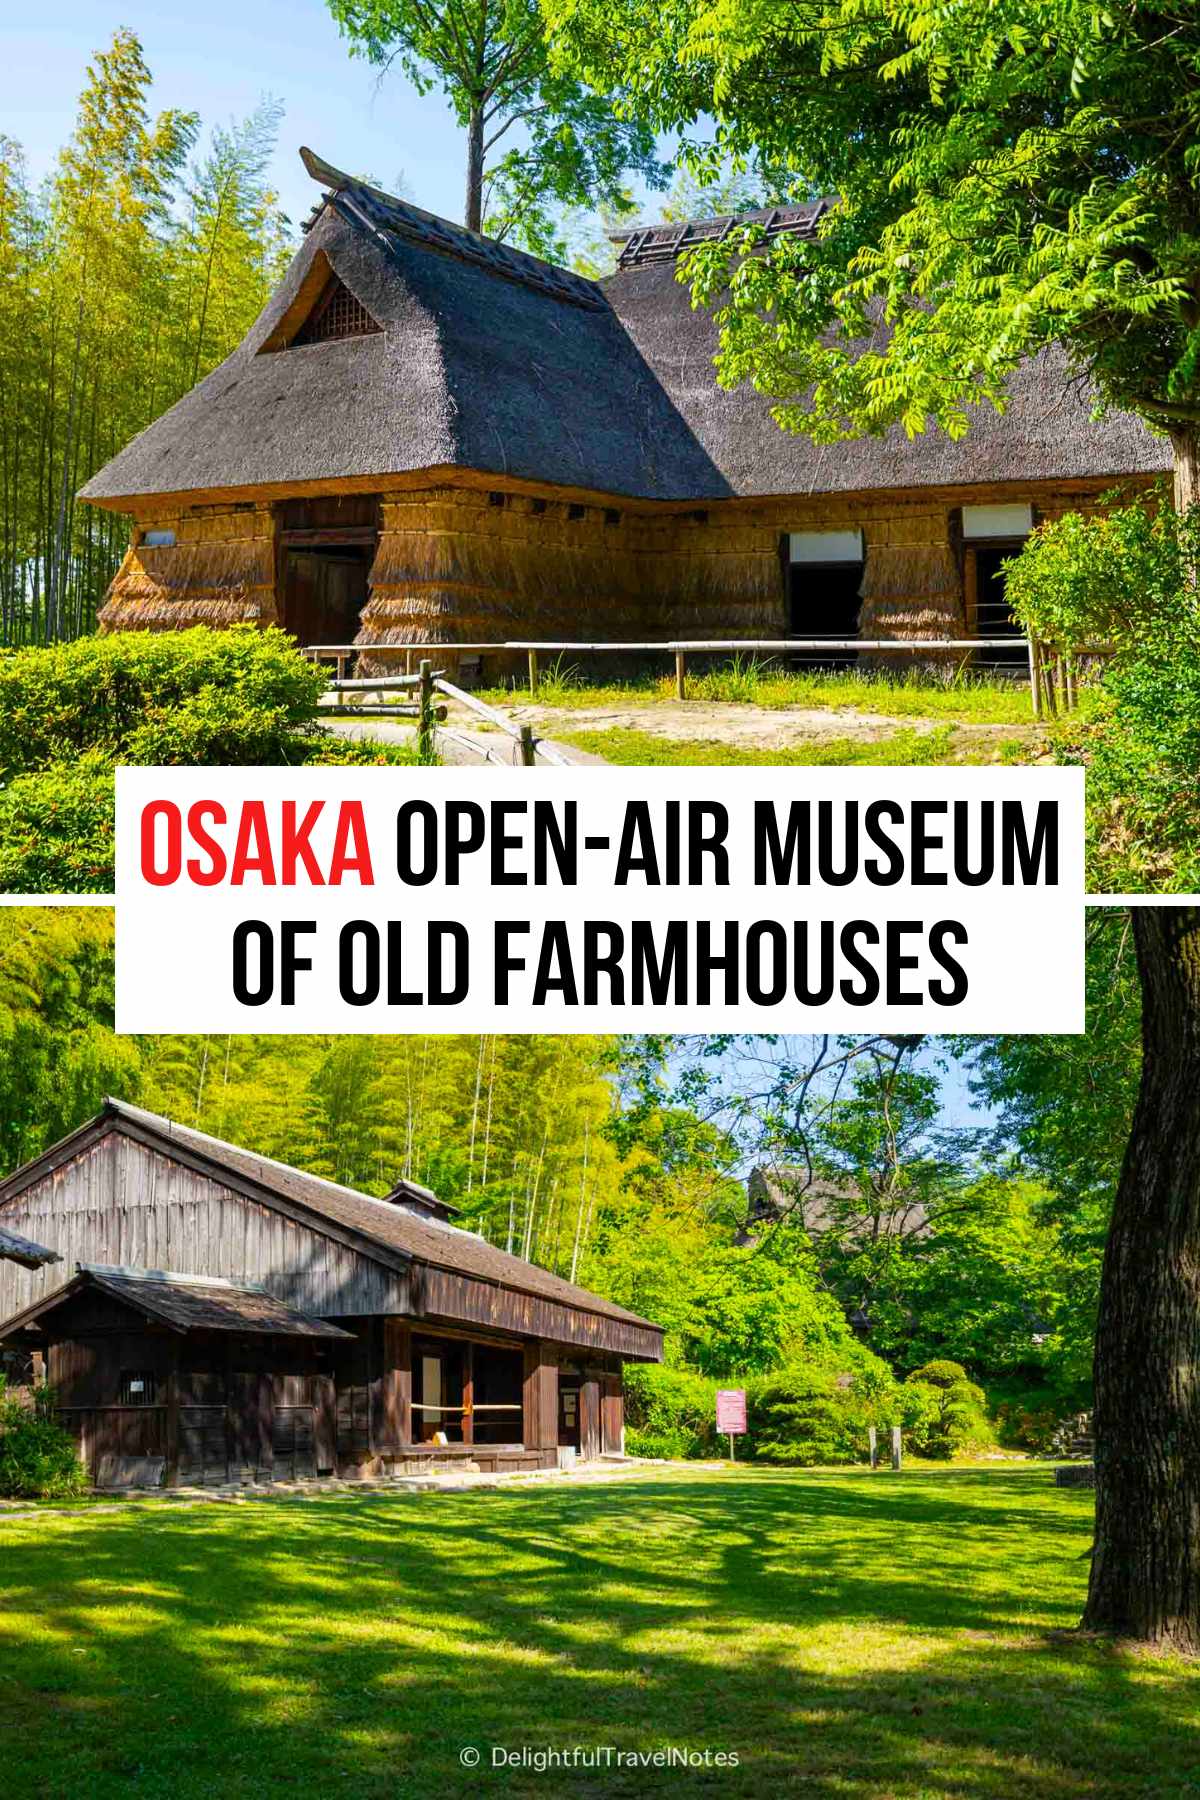 a collage of old farmhouses at the Open-Air Museum in Osaka.